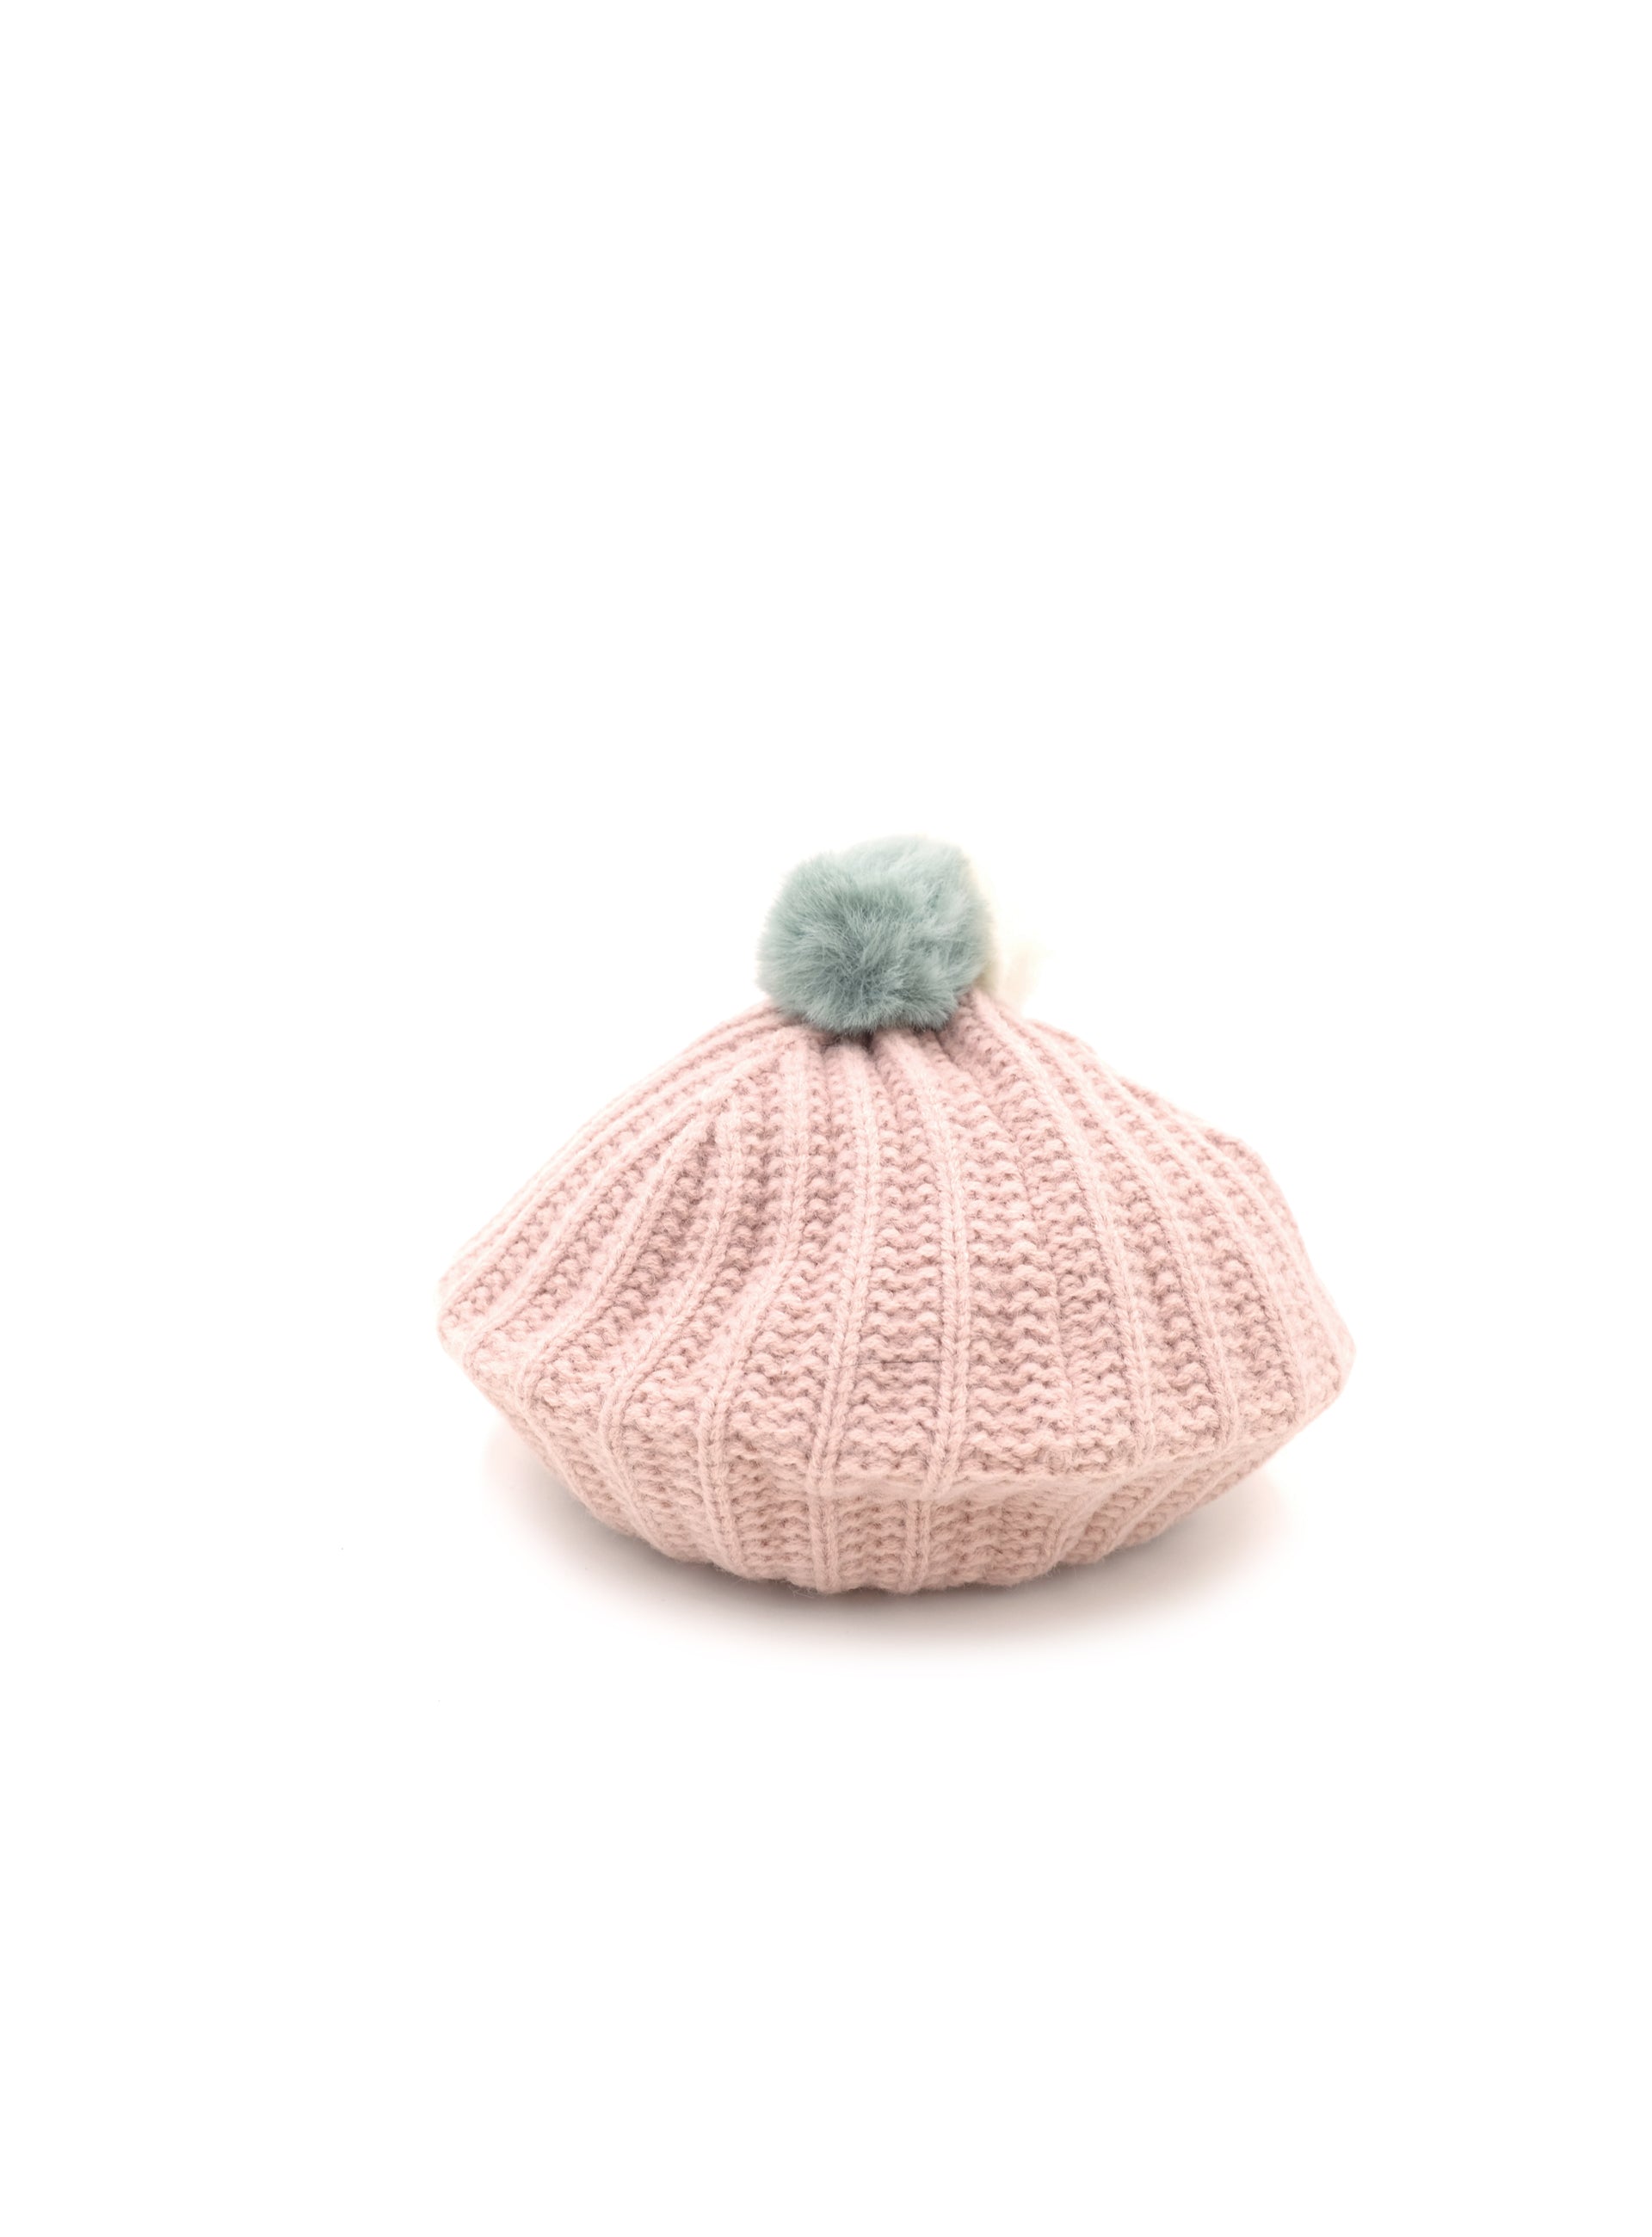 blush pink knitted beret with poms